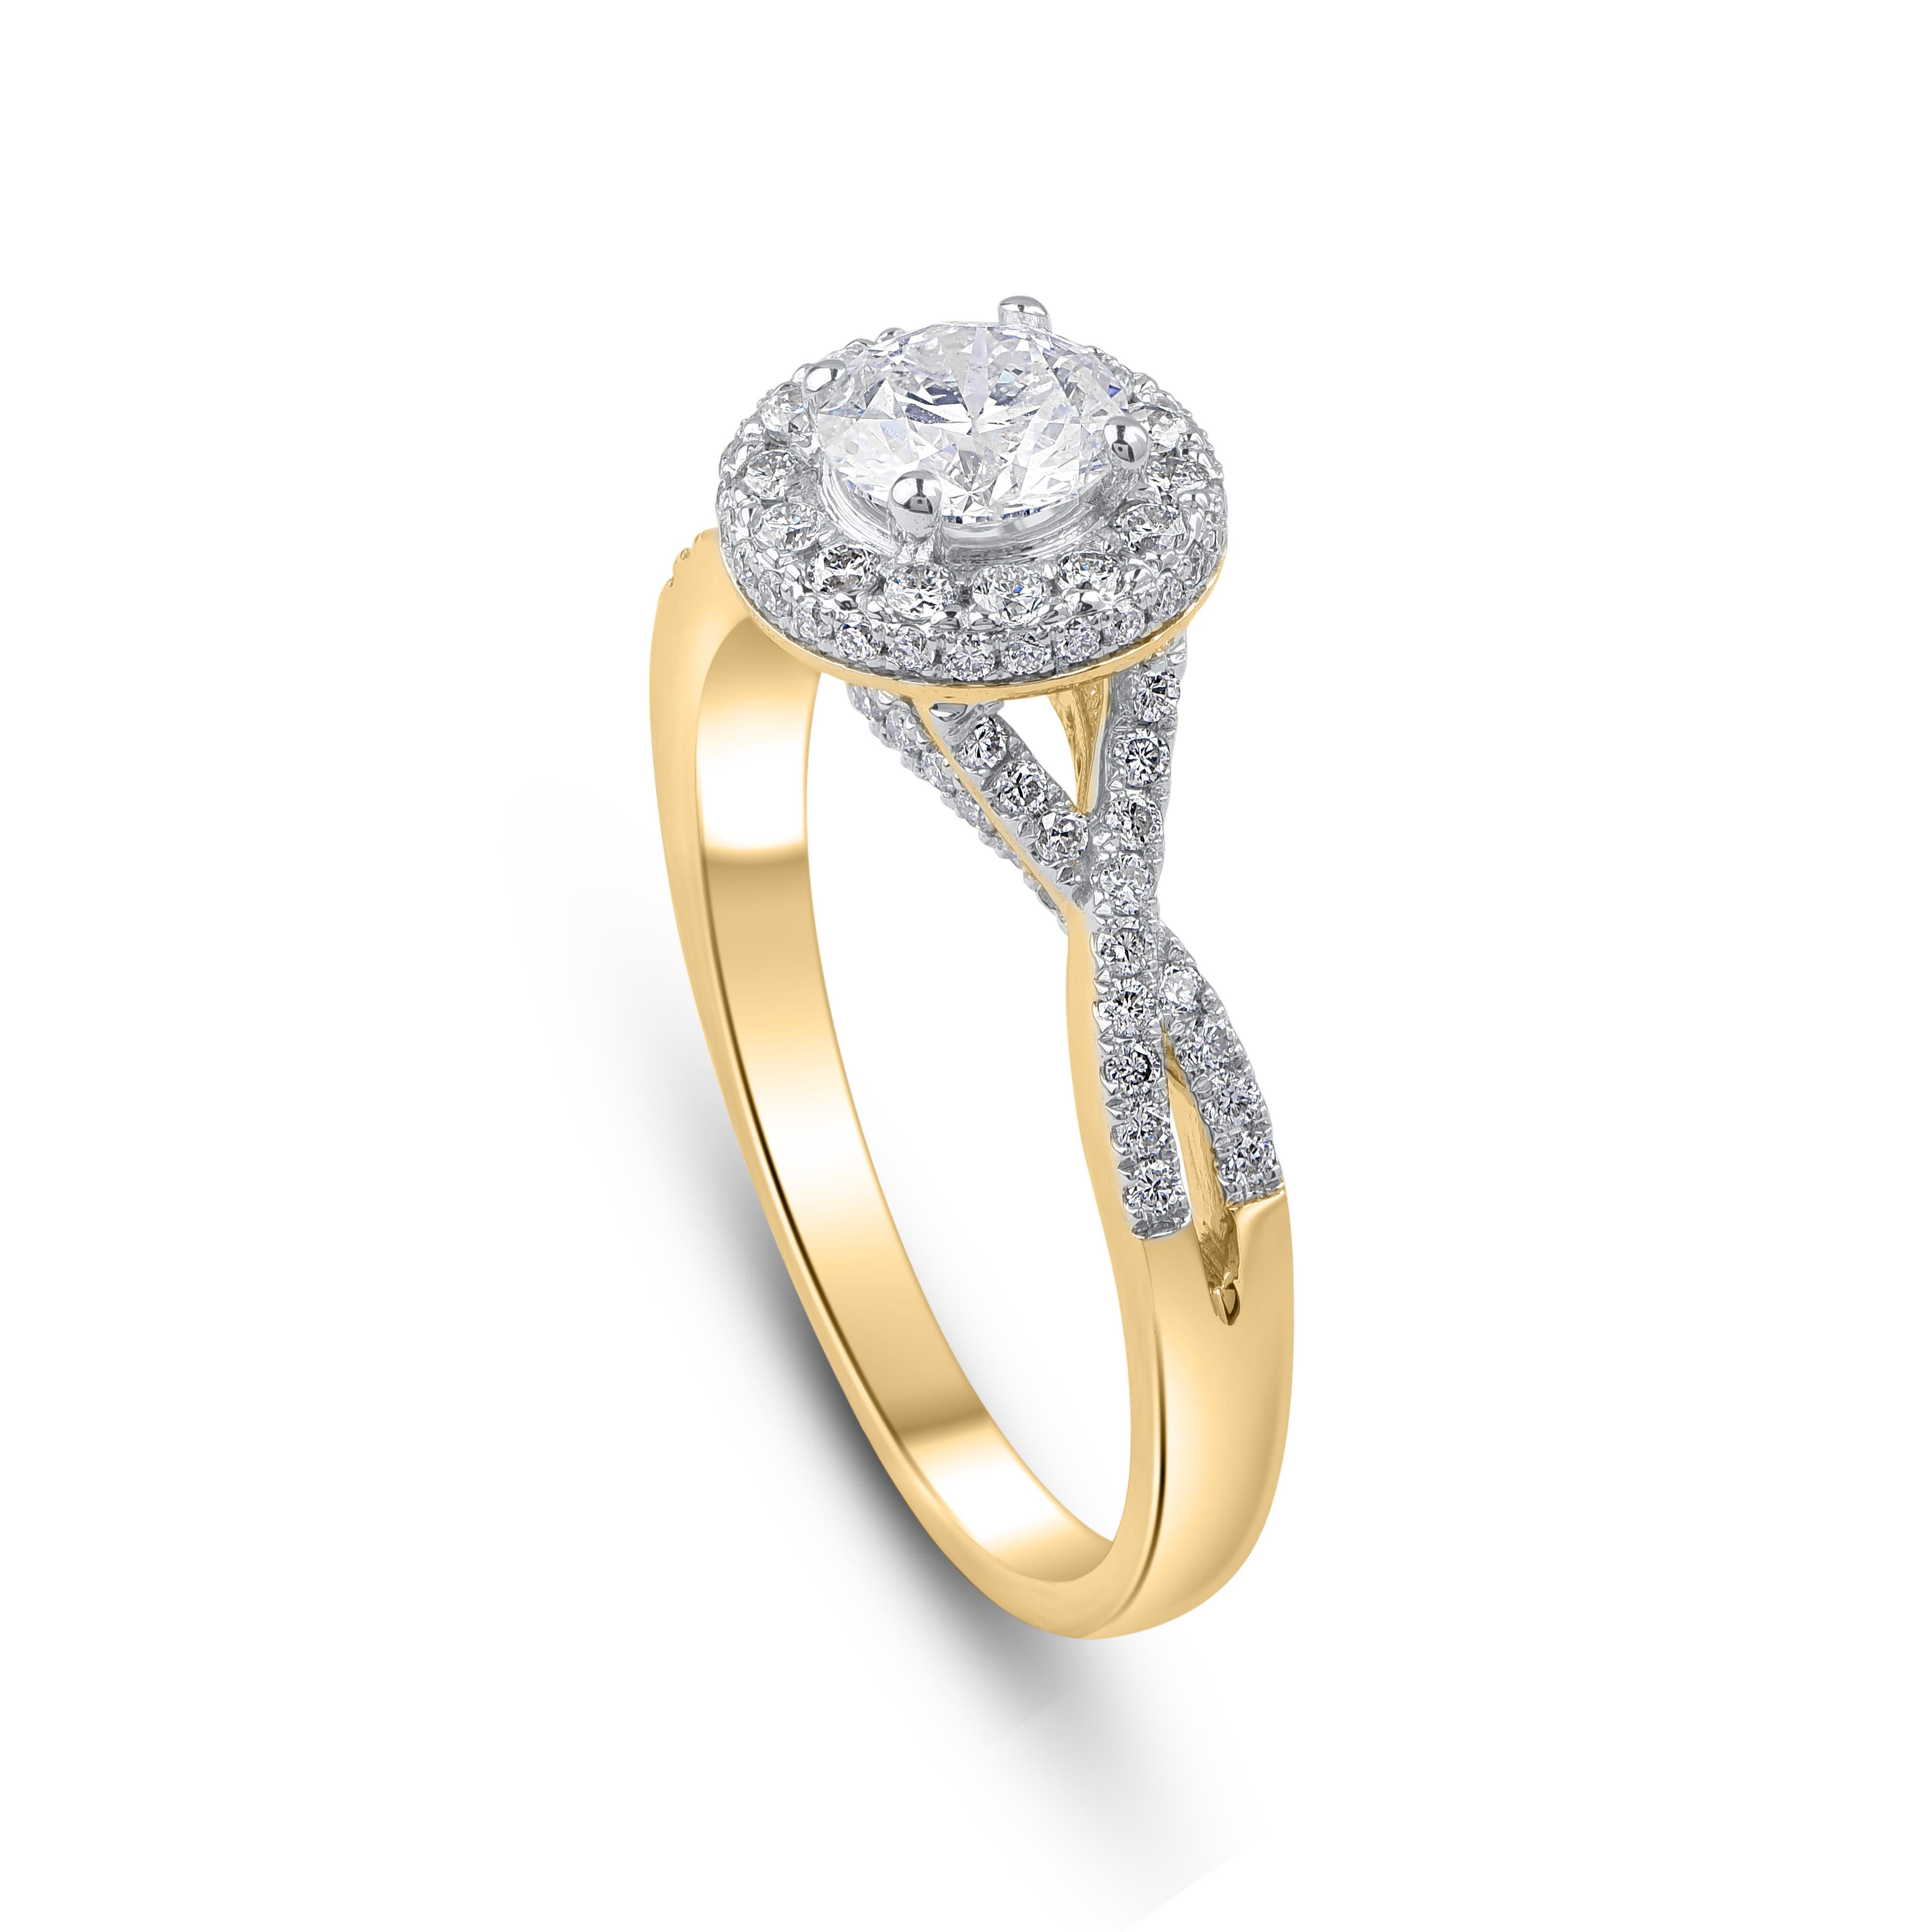 Shimmers with 93 round natural diamond in micro-prong, prong and pave setting and crafted in 14 kt yellow and white gold, diamonds are graded H-I Color, I1-I2 Clarity. Ring size is US size 7.25 and can be resized on request.
